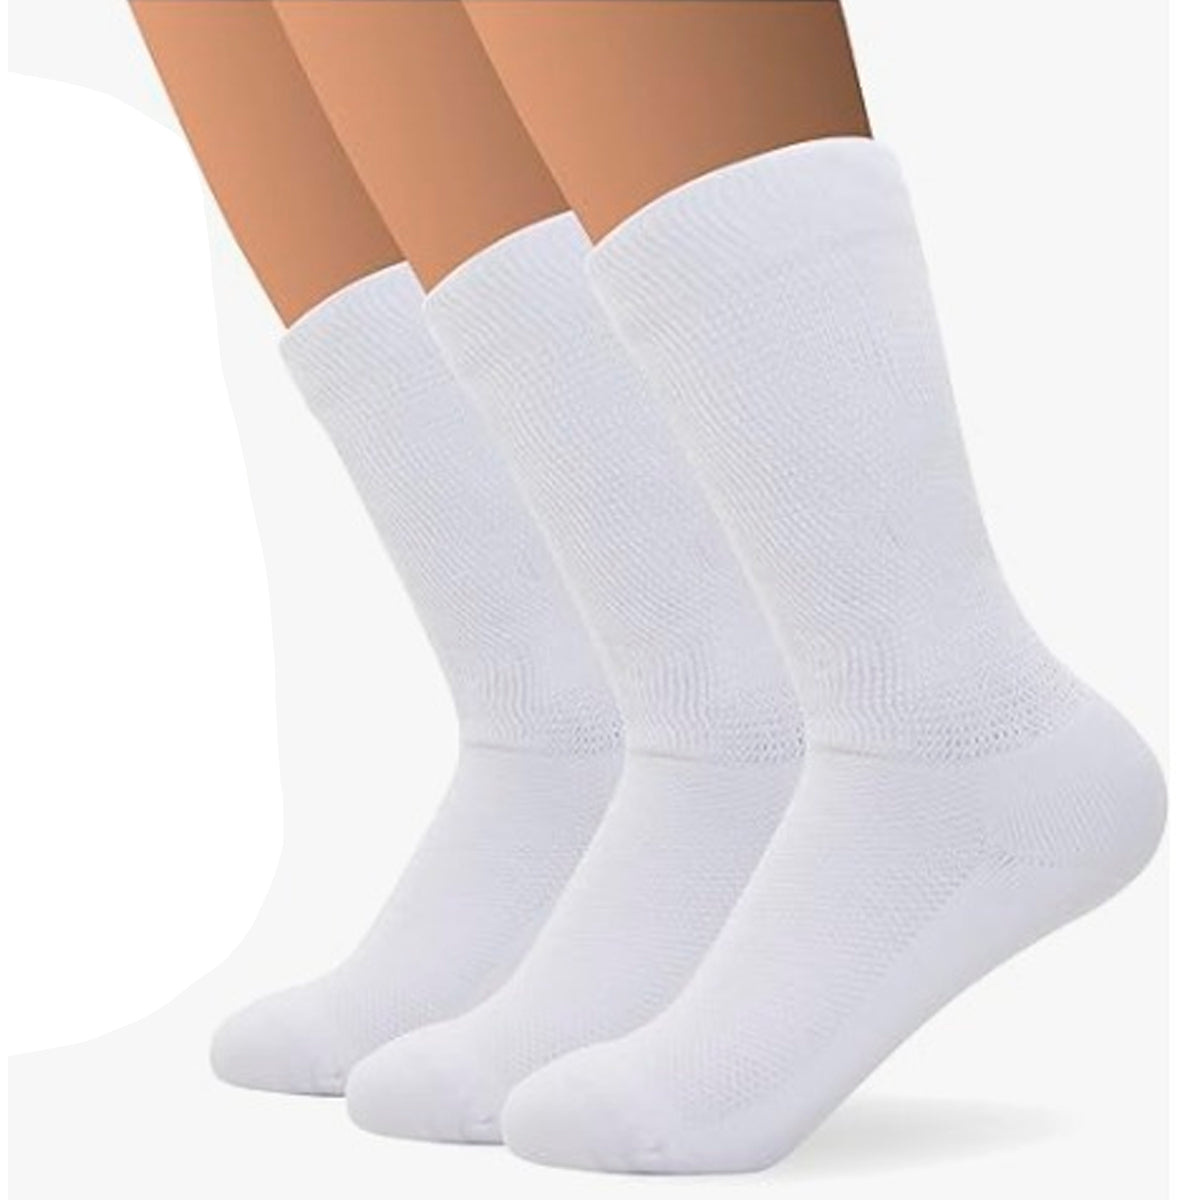 Ripley - PACK 3 PARES CALCETINES 3/4 HOMBRE DEPORTIVA IBALL